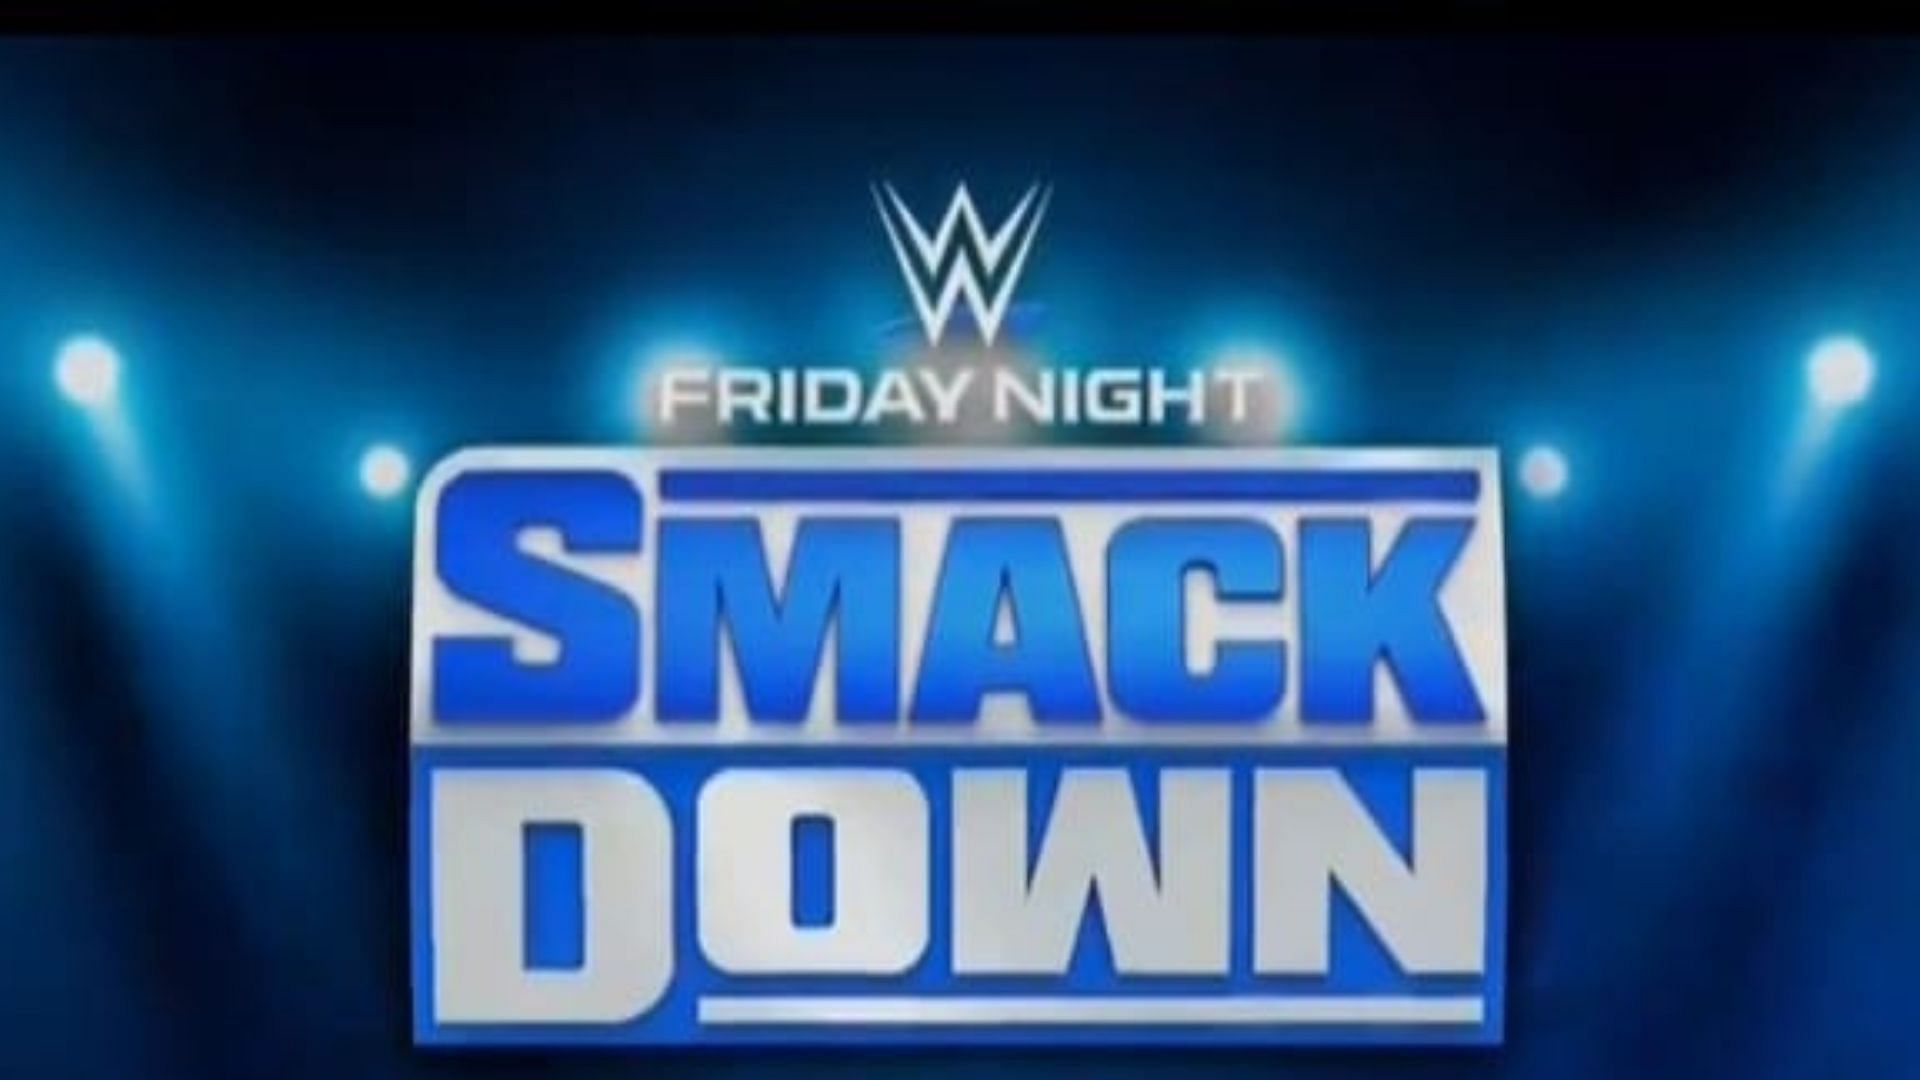 WWE SmackDown airs every Friday night.